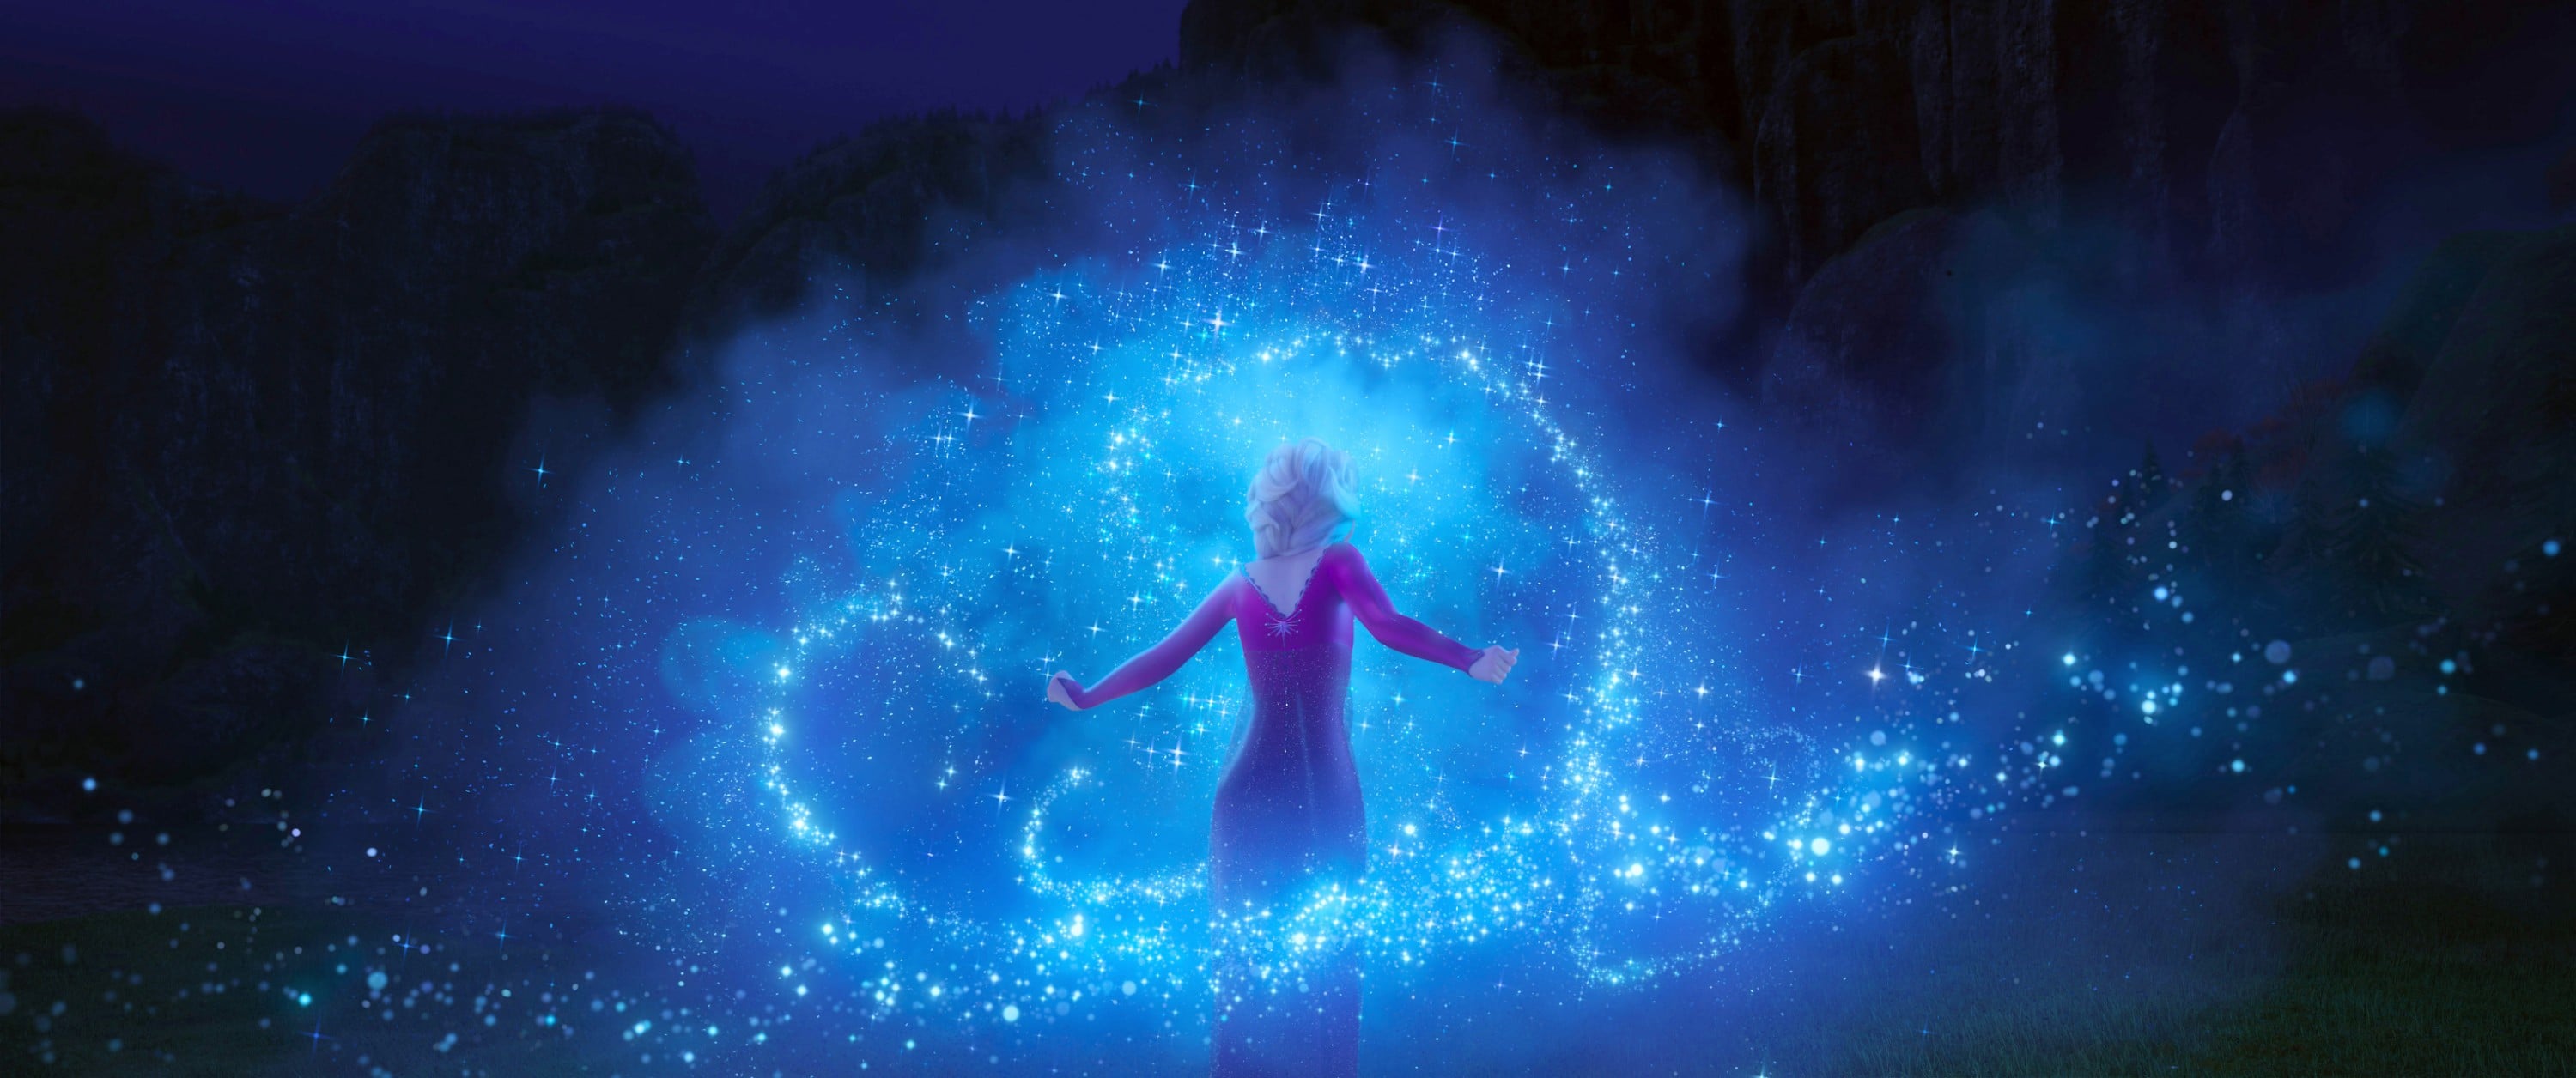 Frozen 3 Is A $1.45 Billion Dream For Disney - But It Hides A Nightmare  Reality